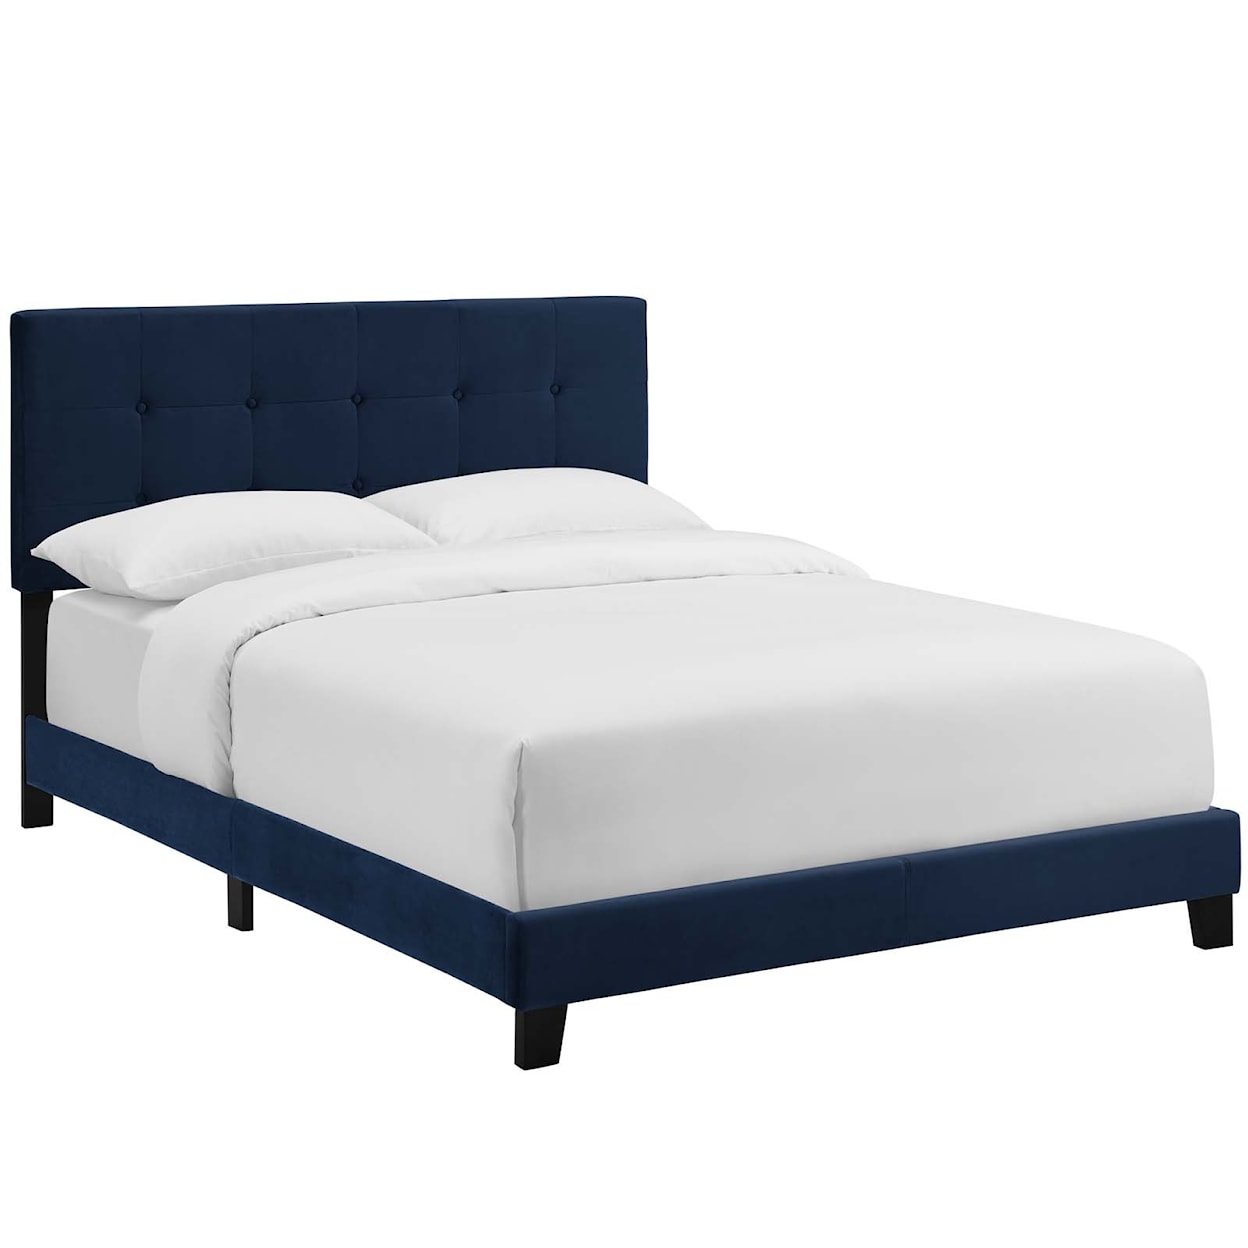 Modway Amira Twin Bed